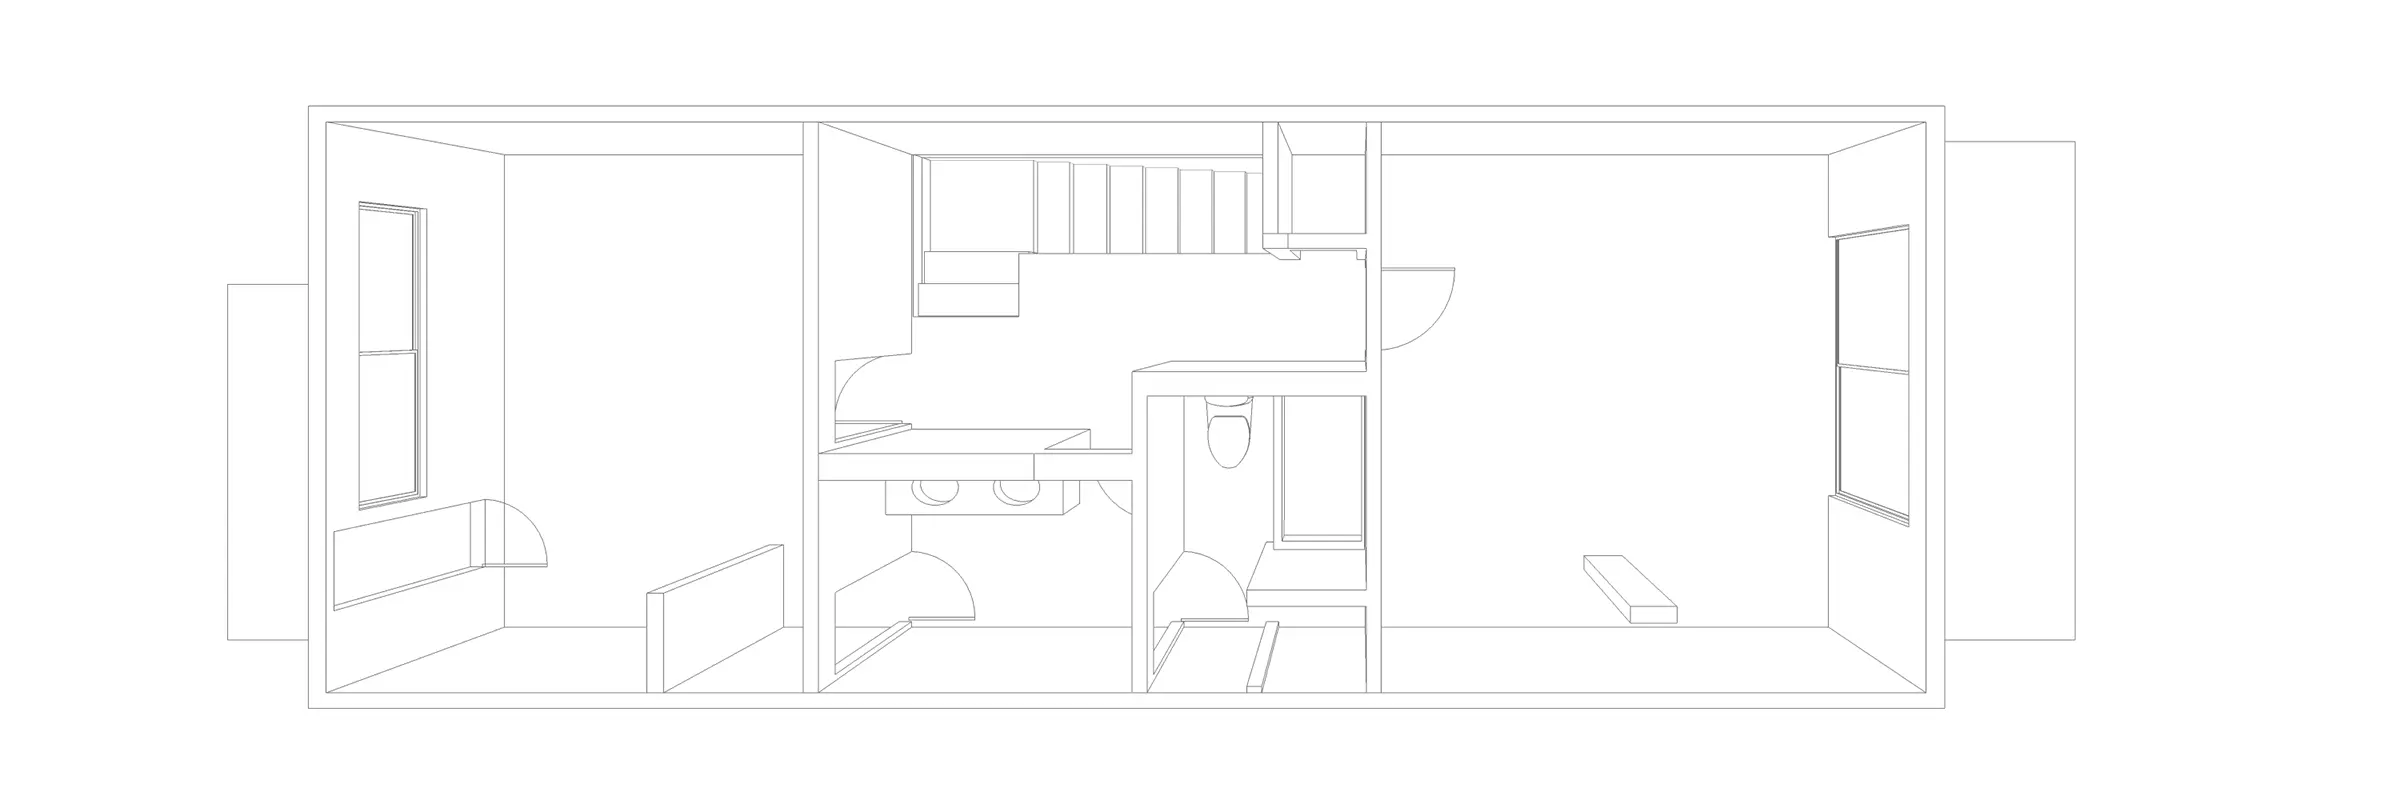 Perspective projection of first floor plan showing split bathroom and limited access to rear from back bedroom.